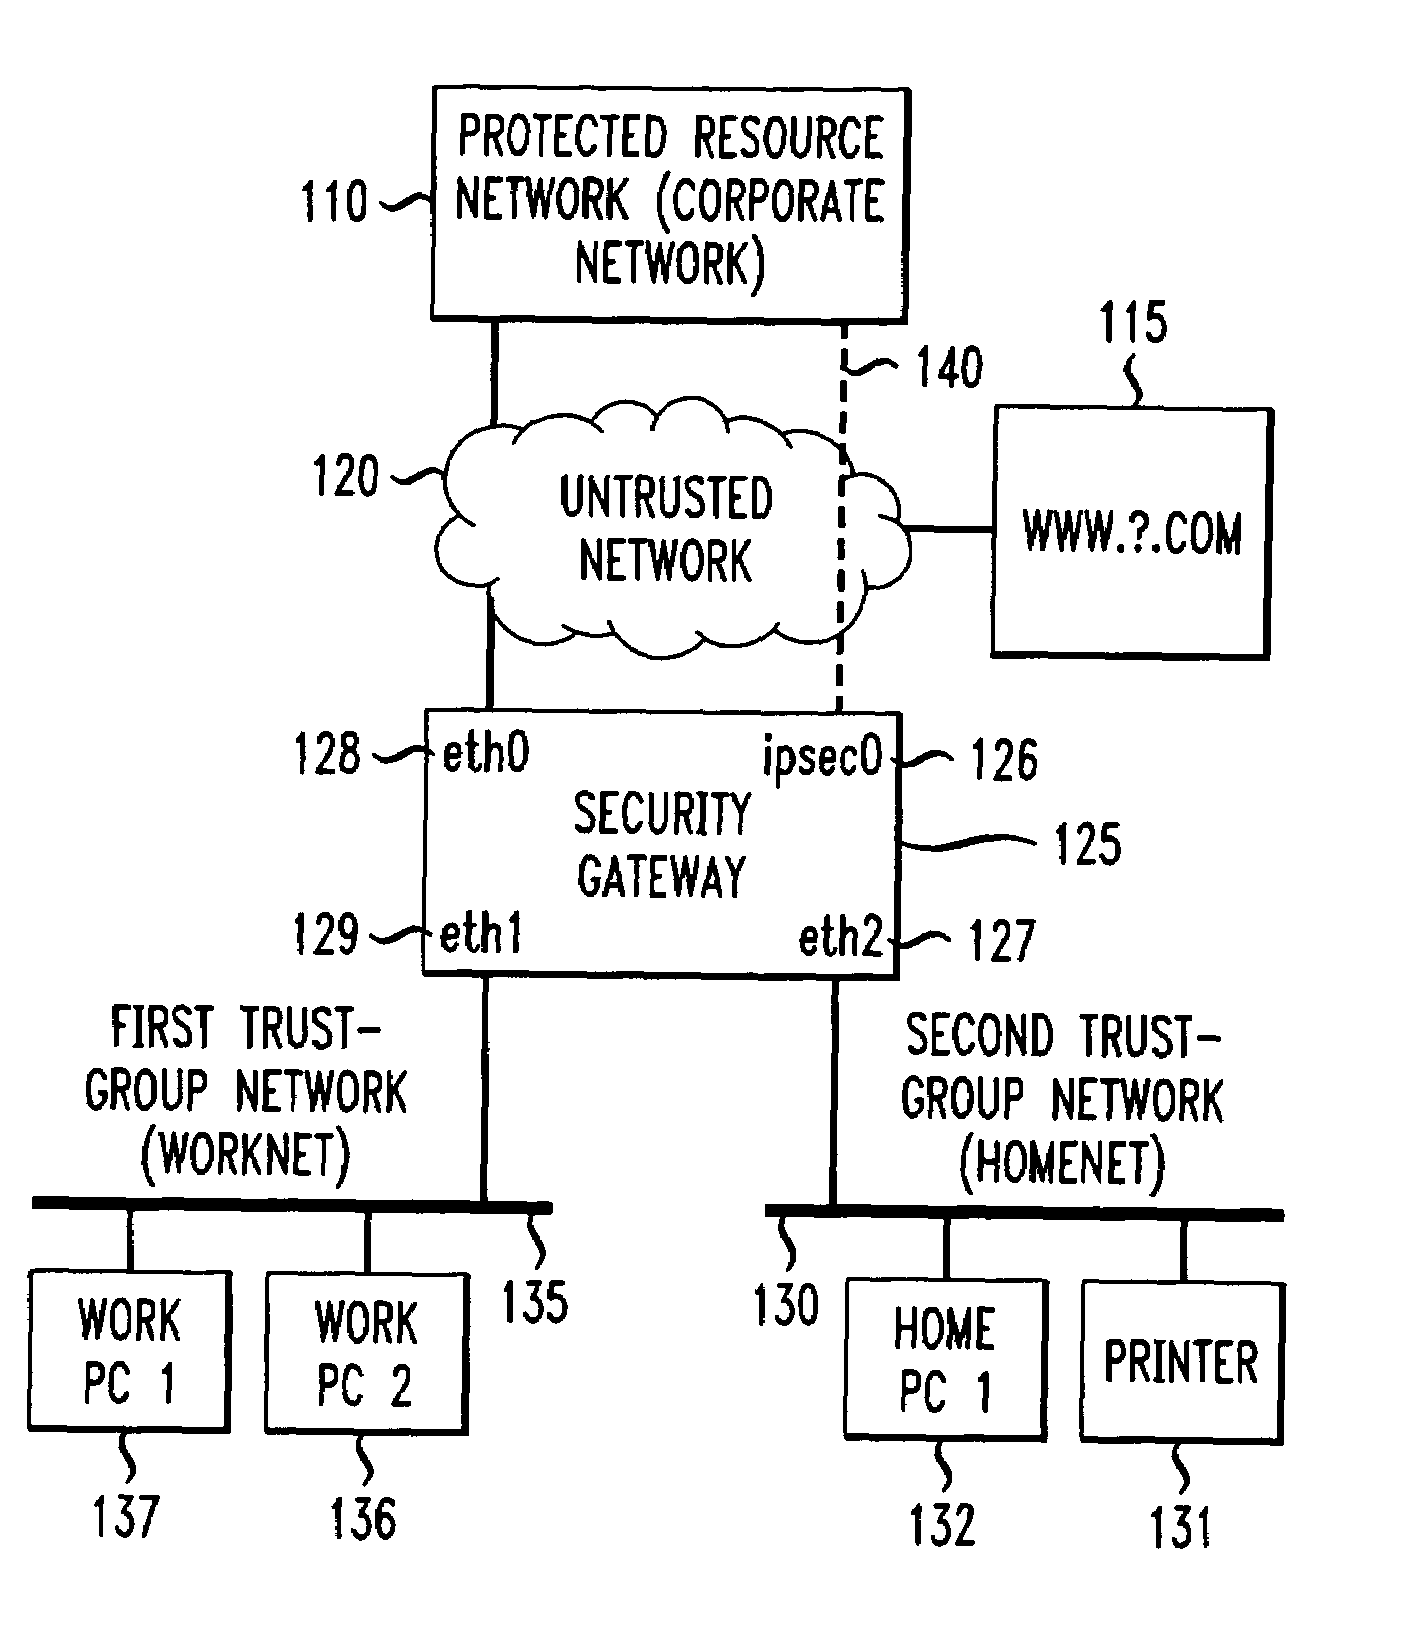 Method and apparatus for securely connecting a plurality of trust-group networks, a protected resource network and an untrusted network